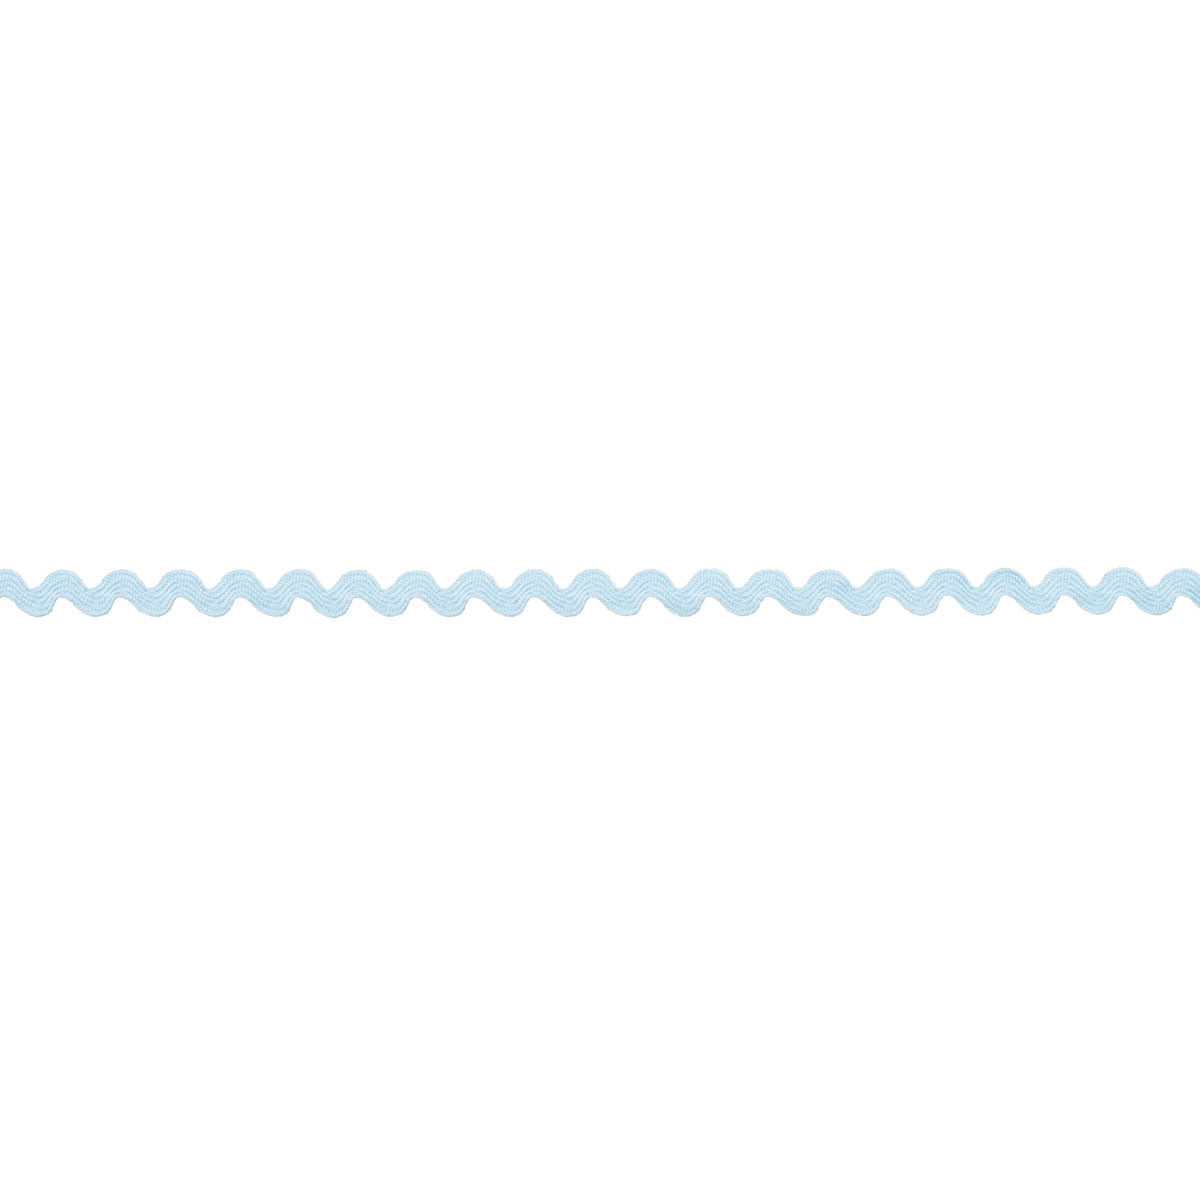 RIC RAC TAPE SMALL | PALE BLUE